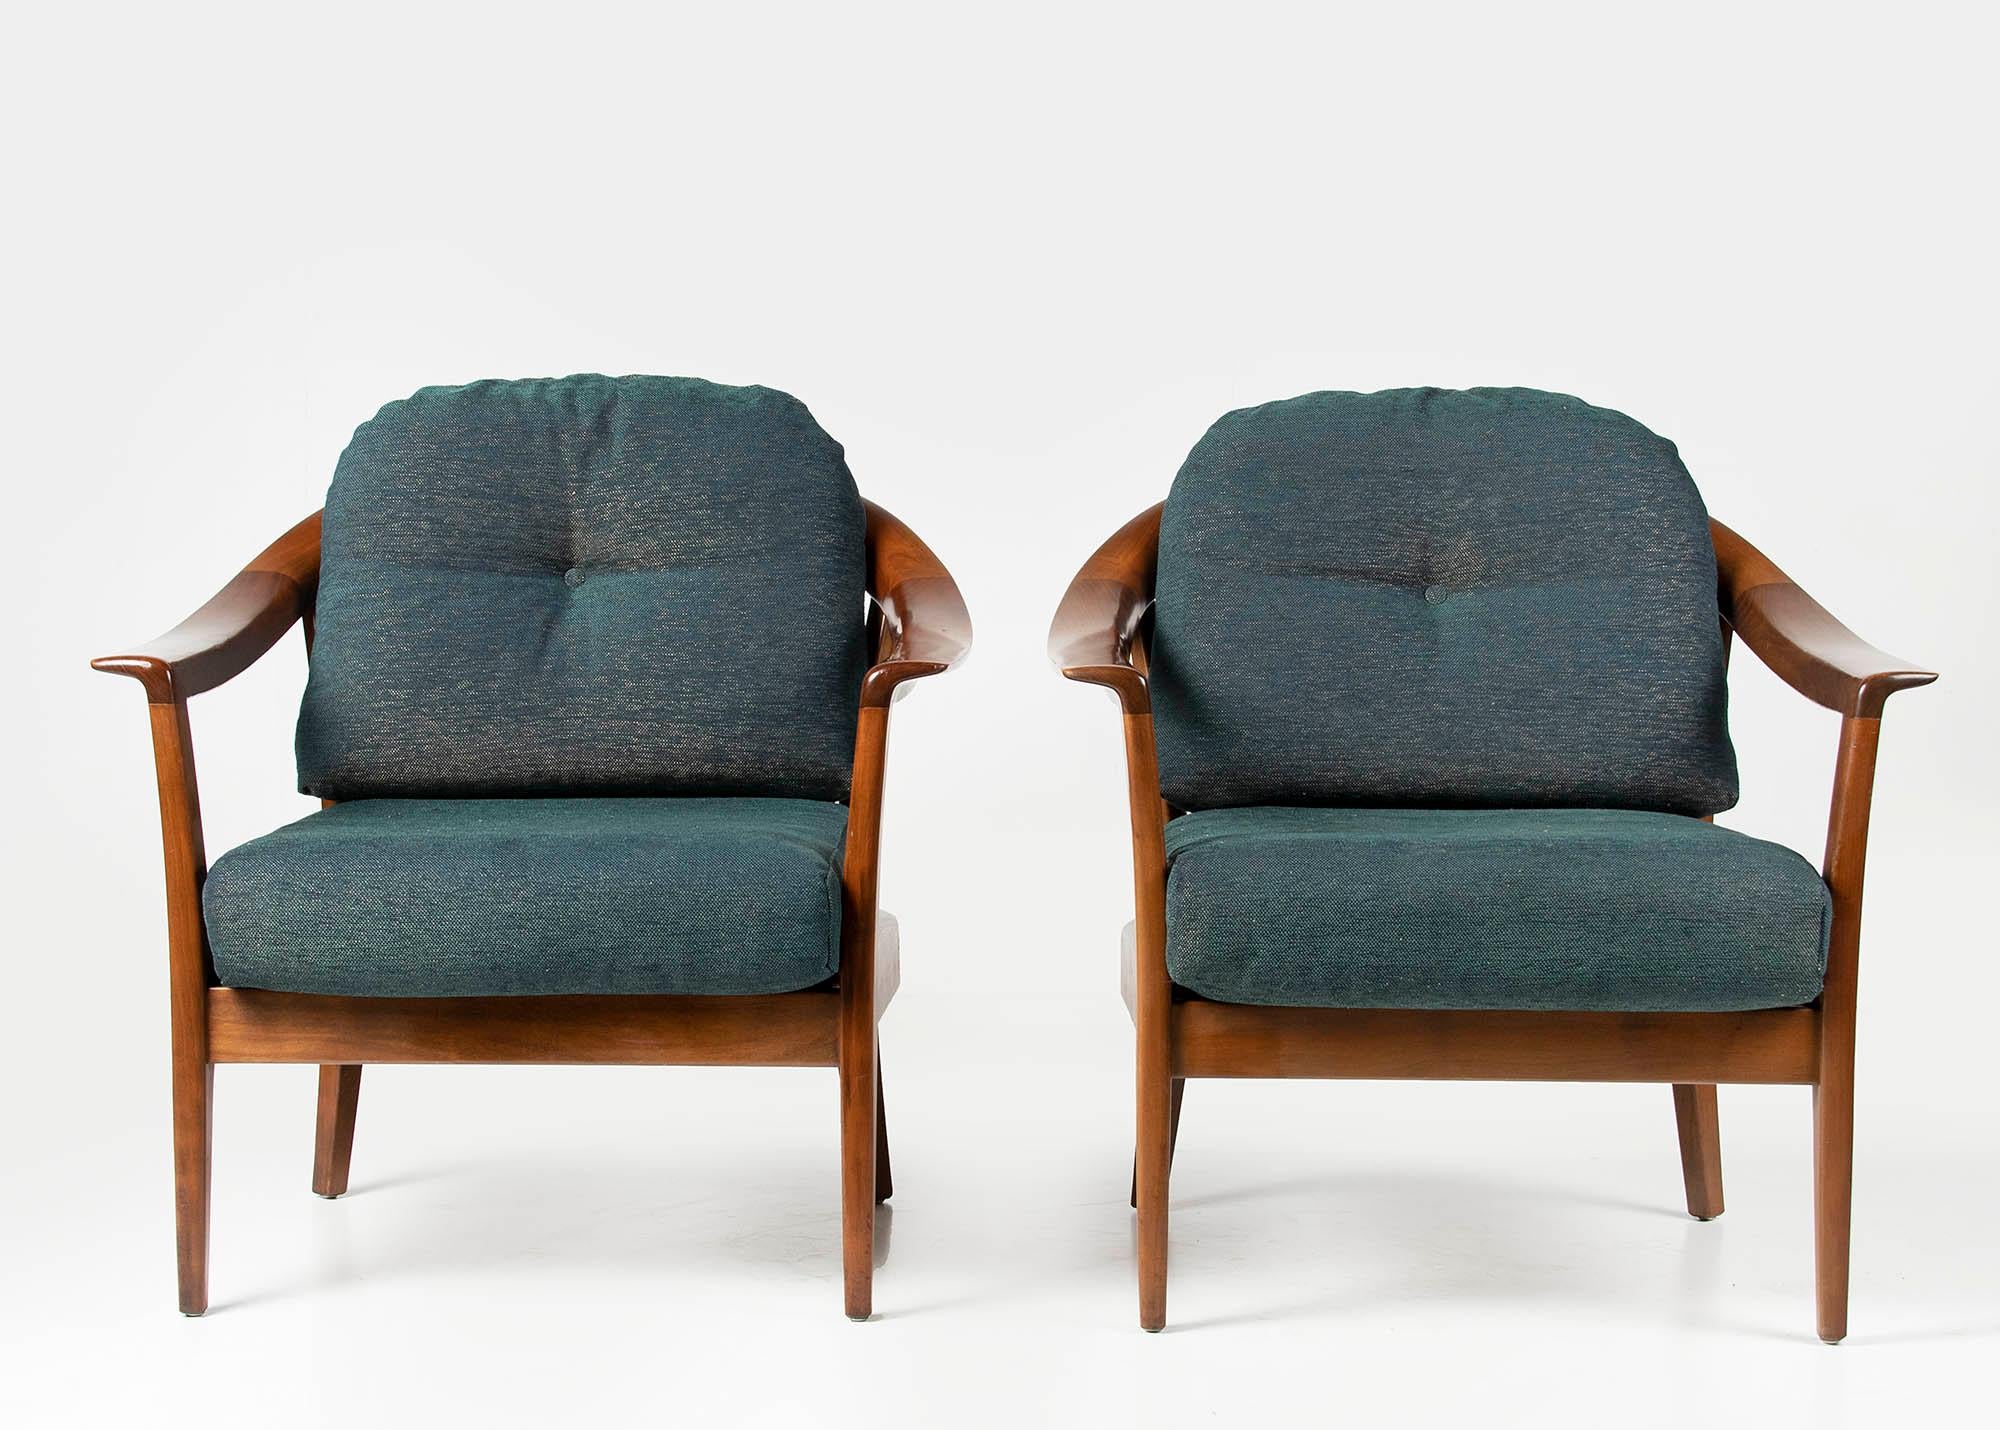 Hand-Crafted Two Cherrywood Easy Chairs with Sidetable made by Wilhelm Knoll Mid-20th Century